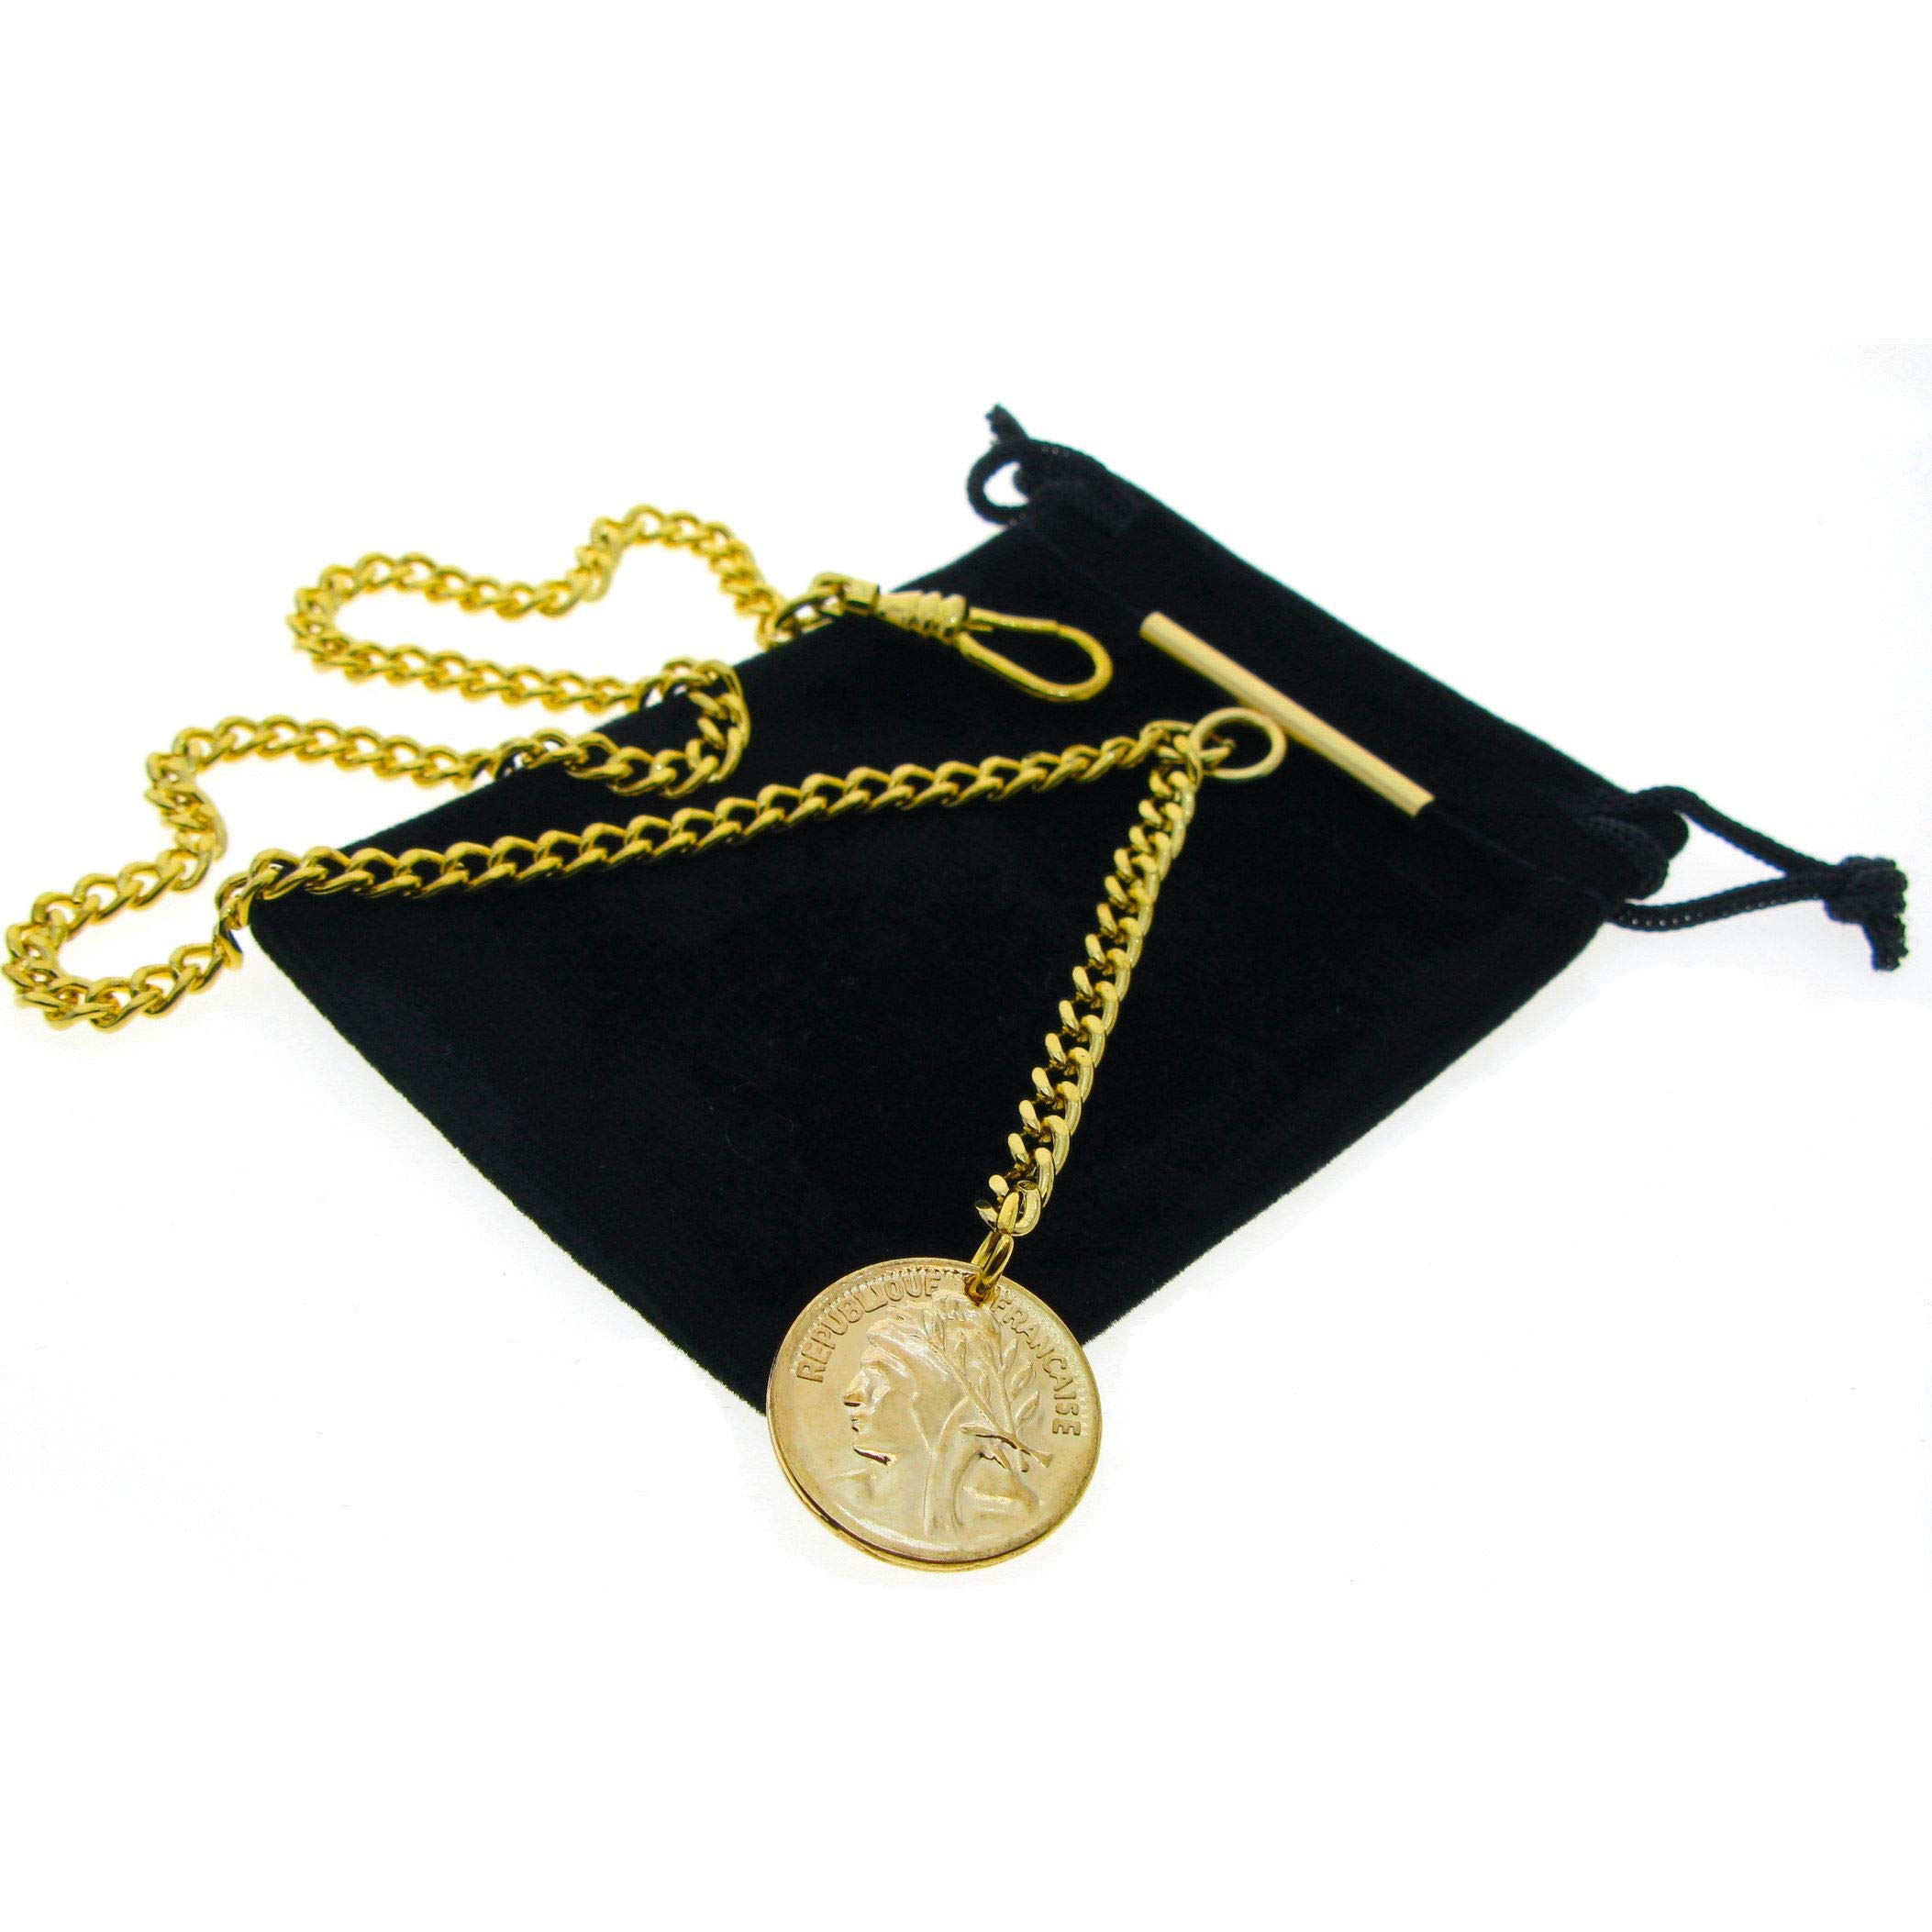 Albert Chain Gold Color Pocket Watch Chains for Men with T Bar Swivel Clasp and Ancient France Coin Design Medal Fob AC78